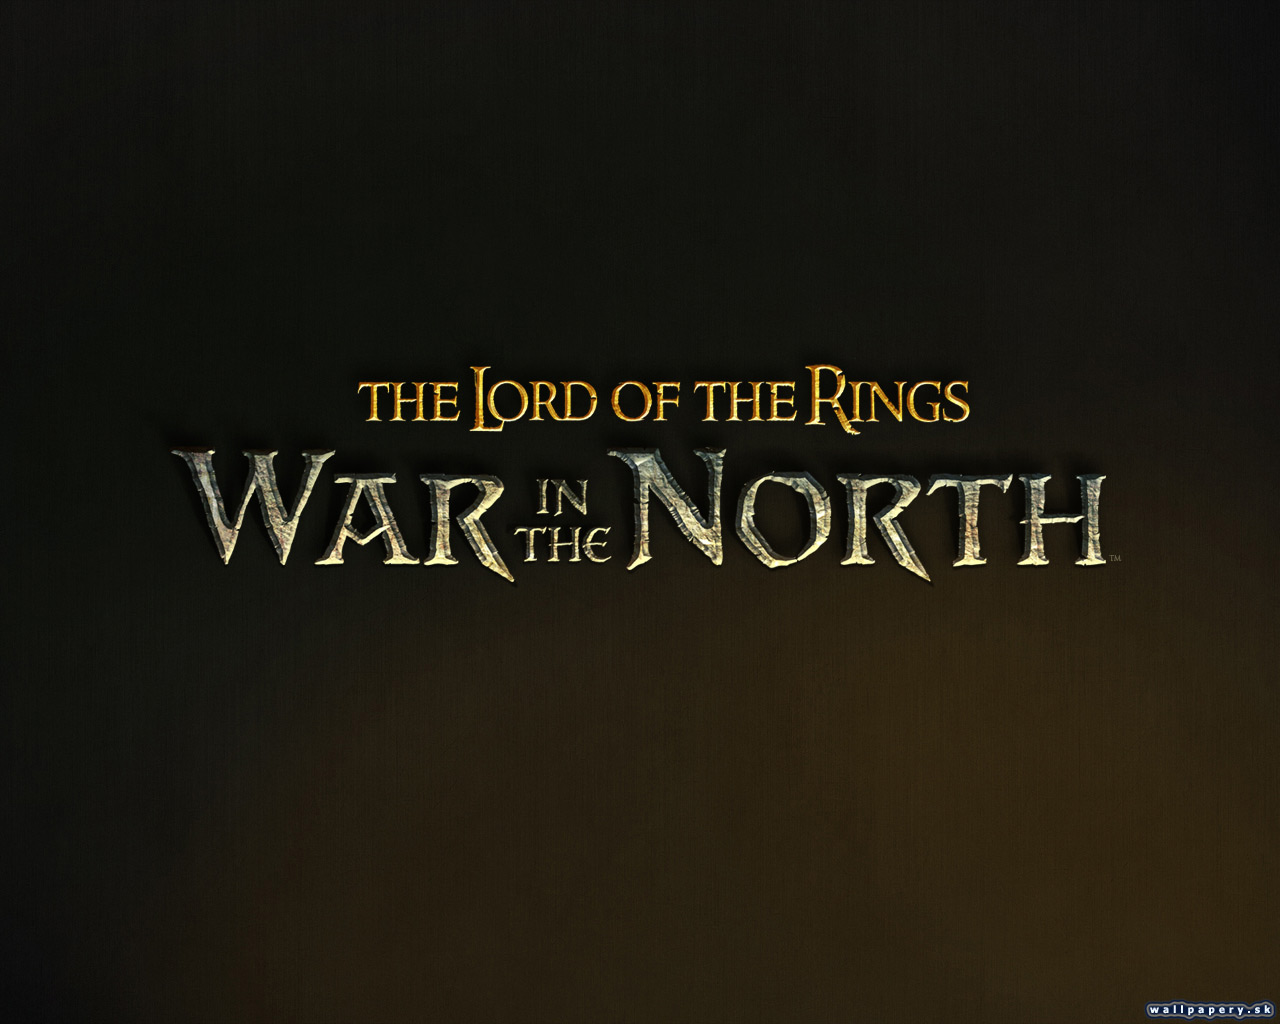 The Lord of the Rings: War in the North - wallpaper 1